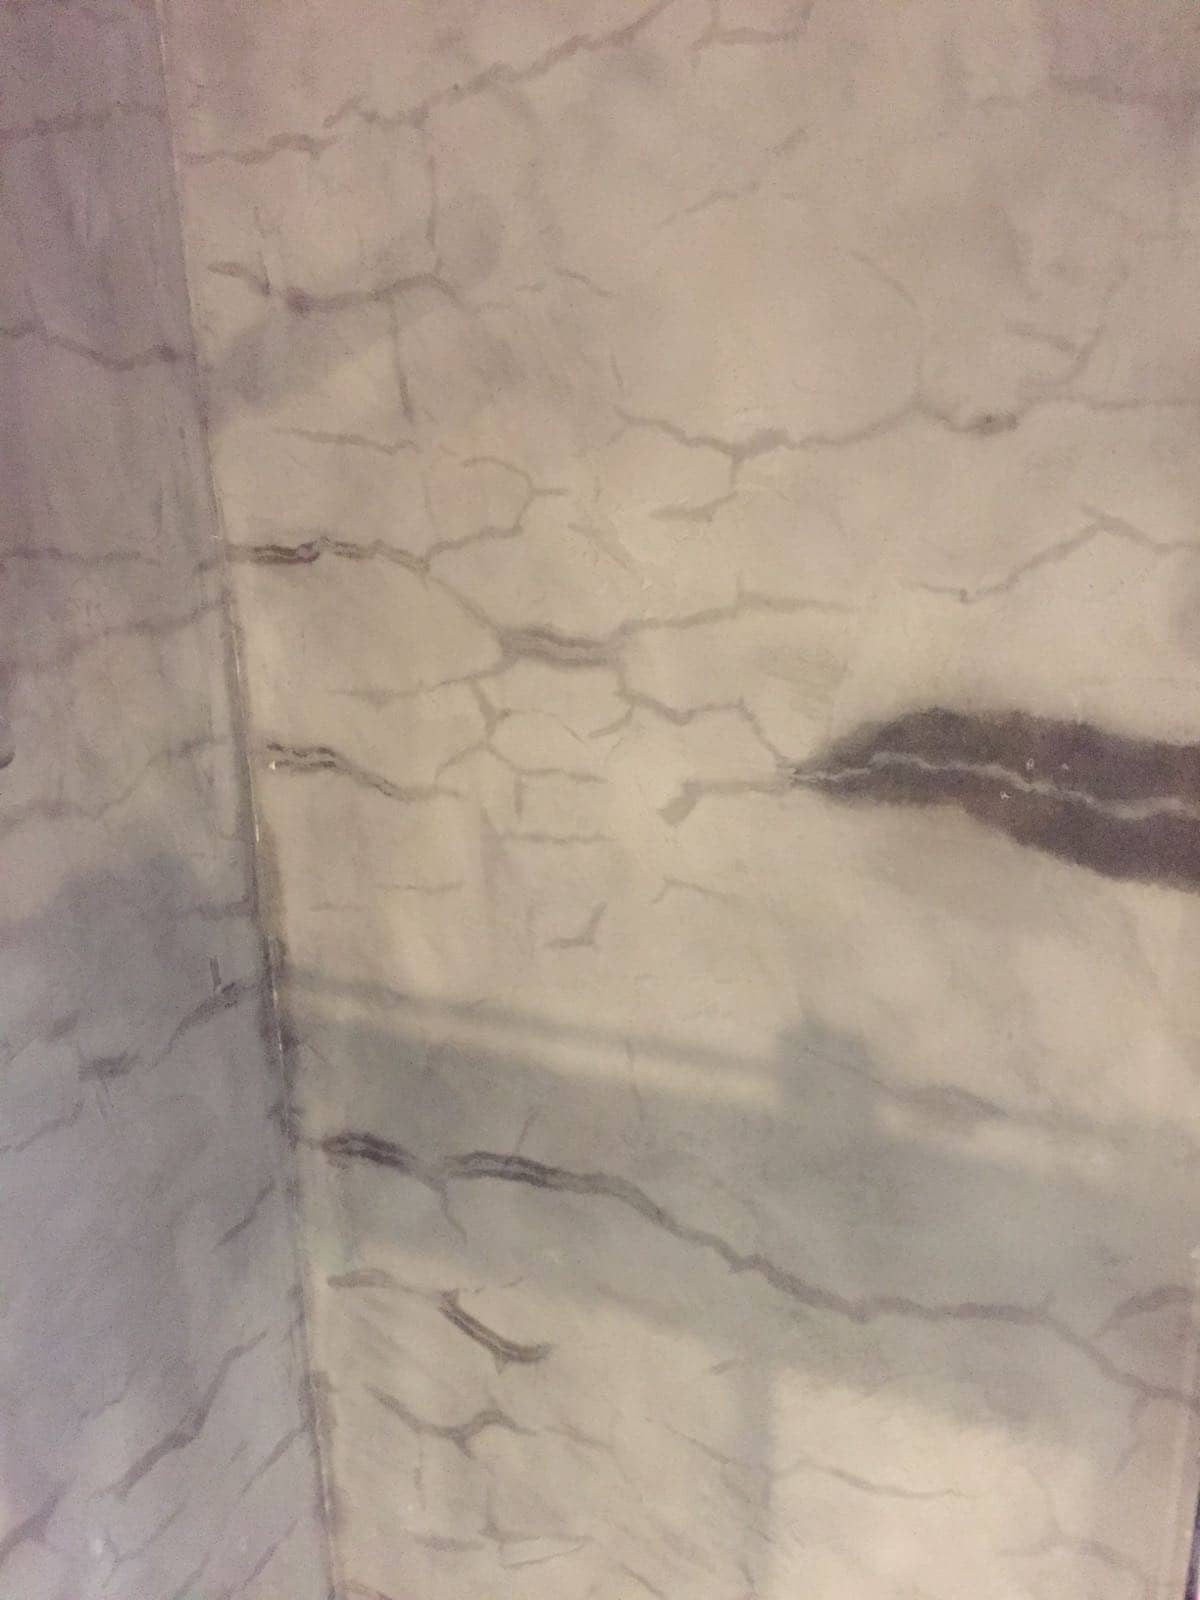 Microcement and humidity on the shower wall